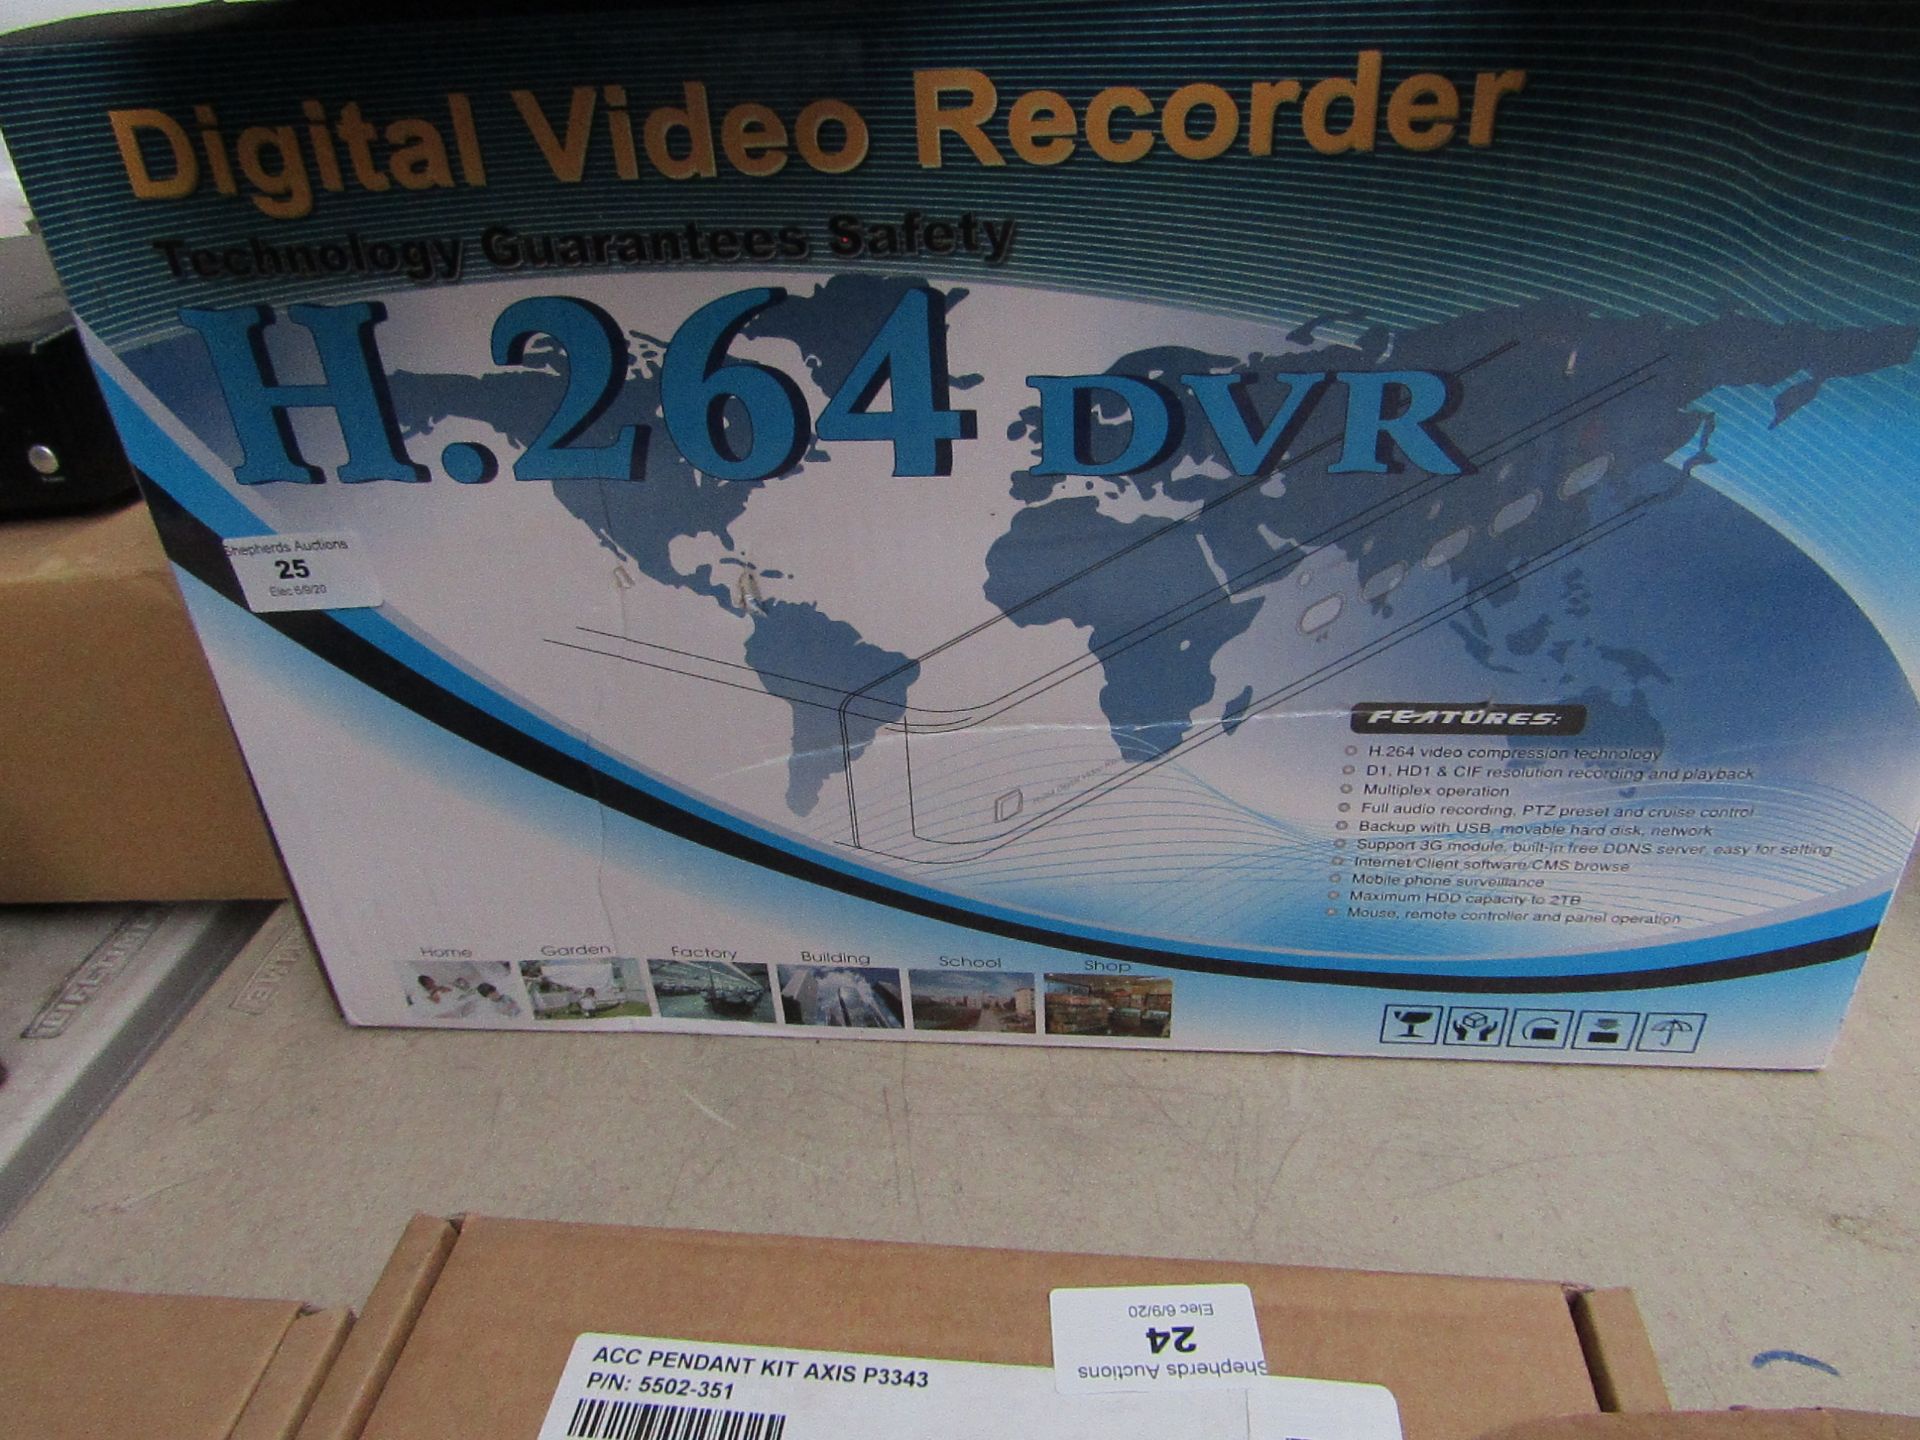 4x Digital Video Recorder (H.264 DVR), unchecked and boxed. Functions compatible include; phone